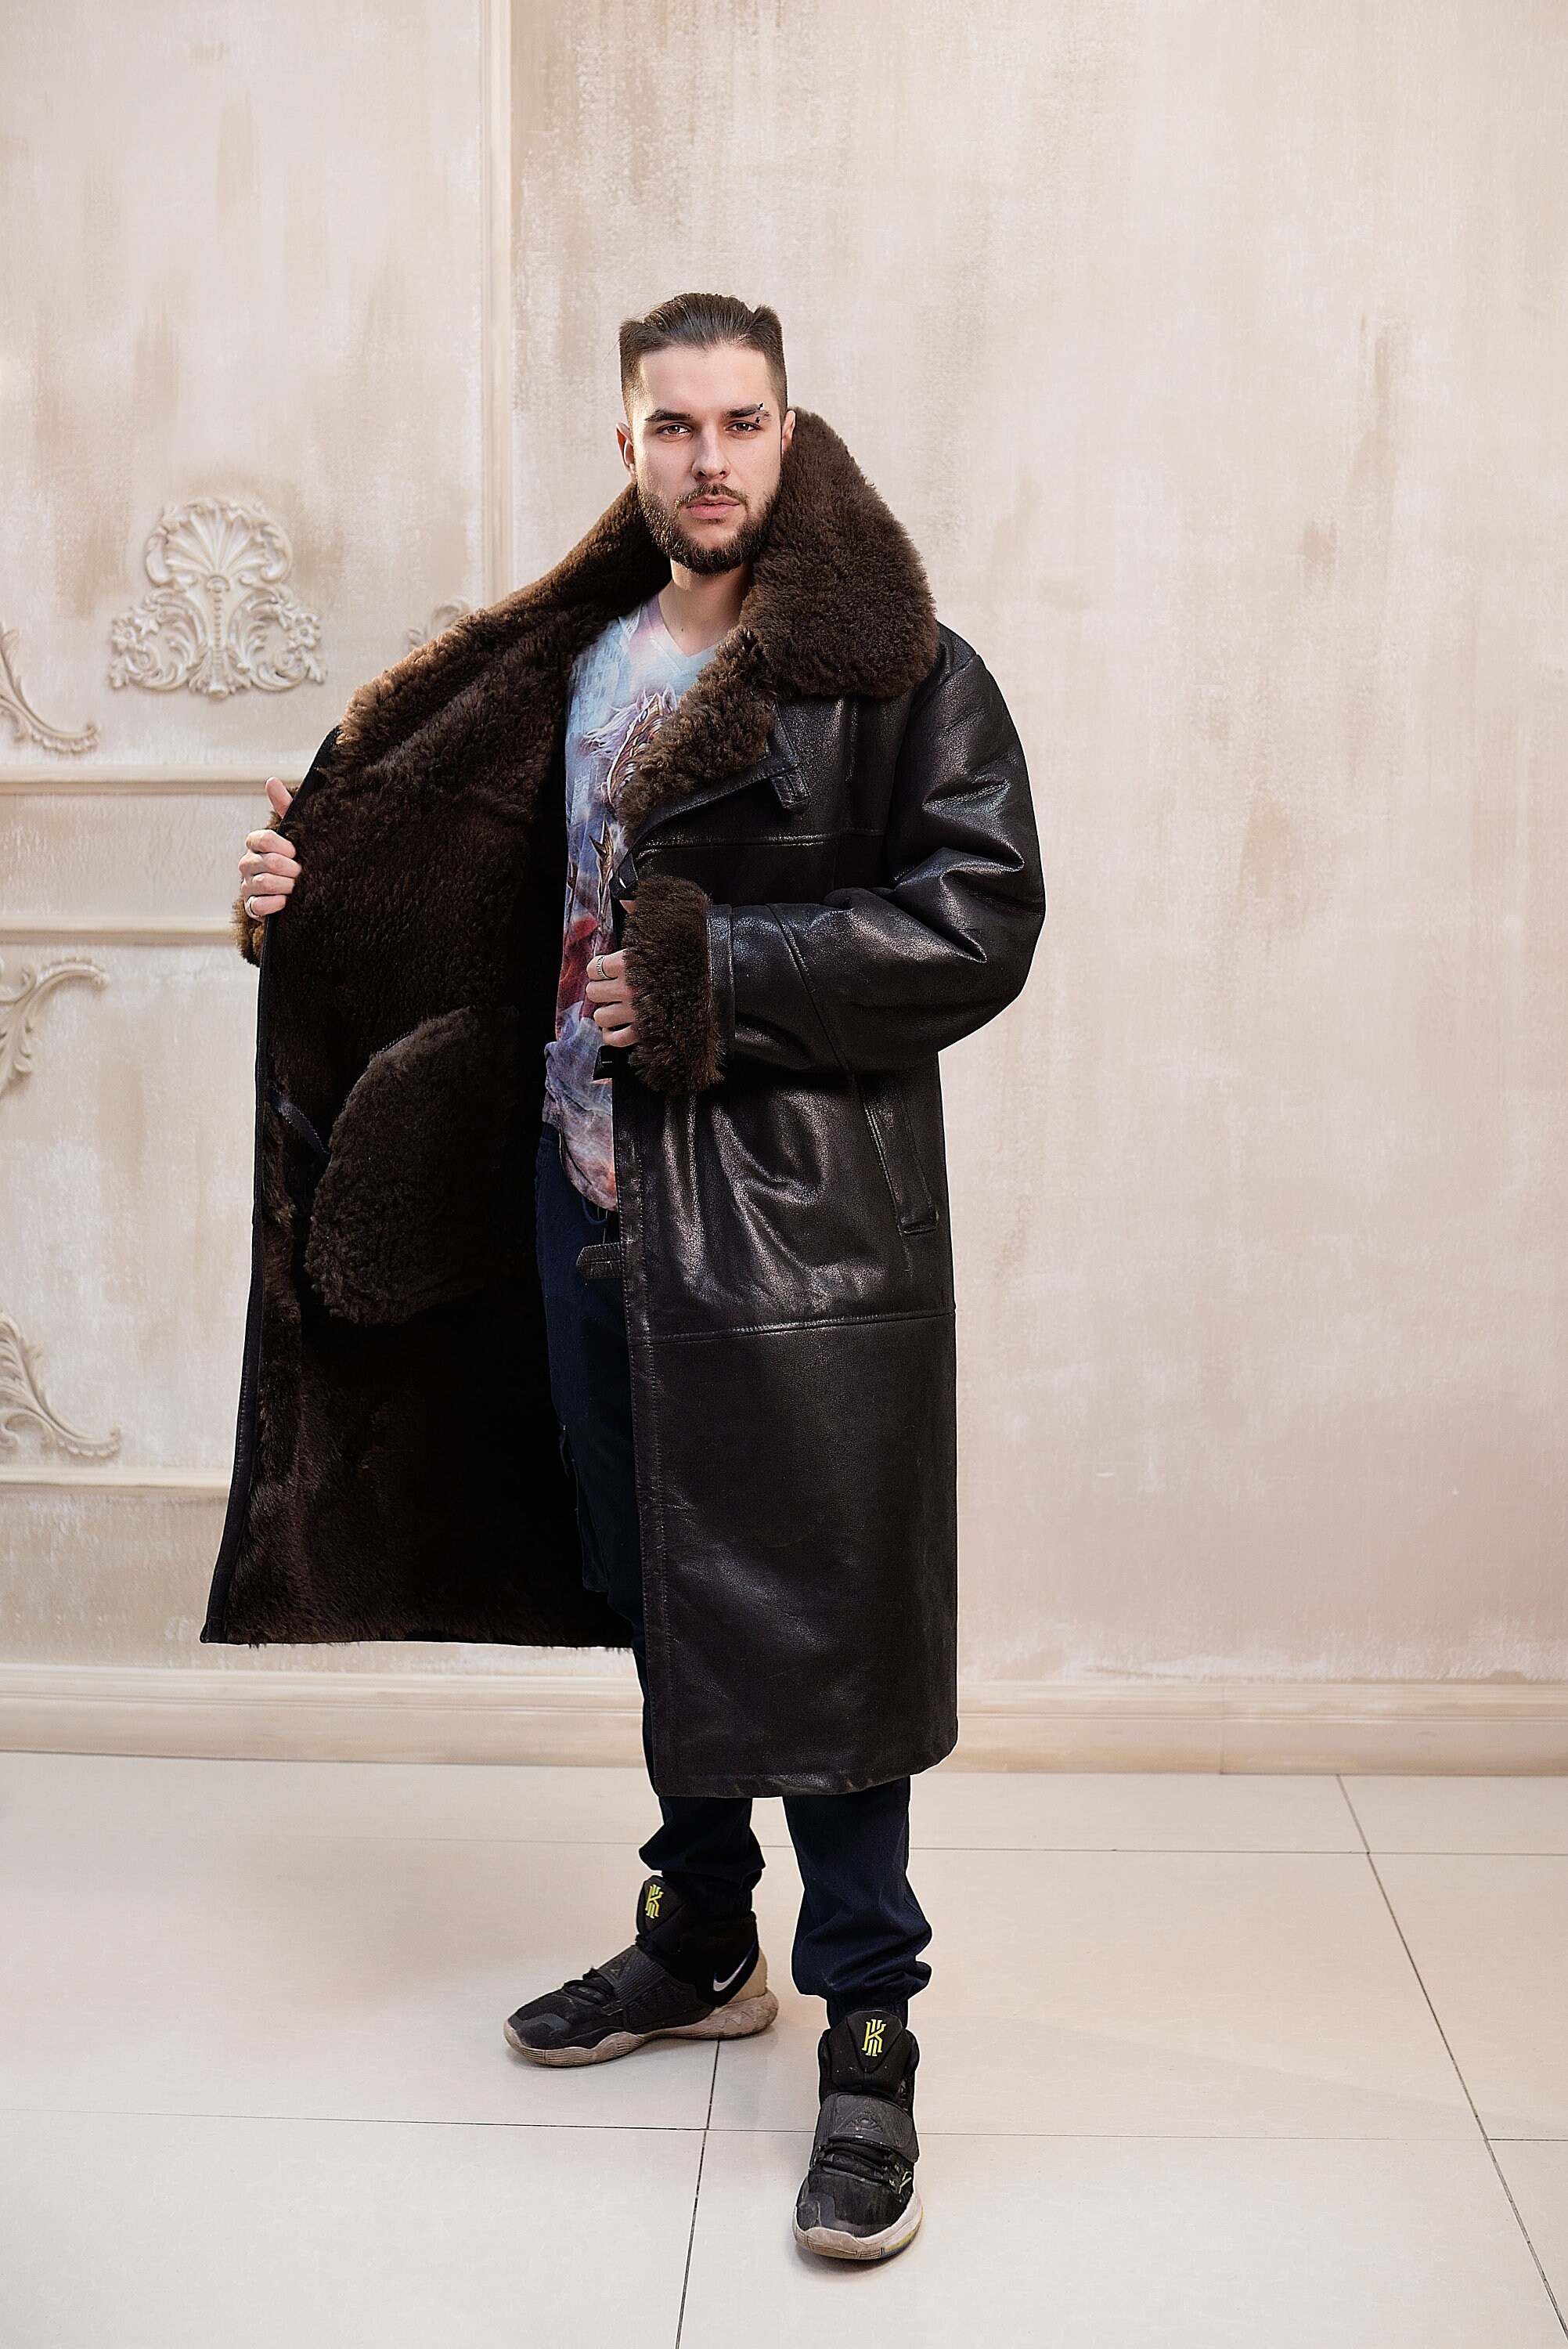 Mens Long Shearling Sheepskin Coat in Brown Color With Wide - Etsy